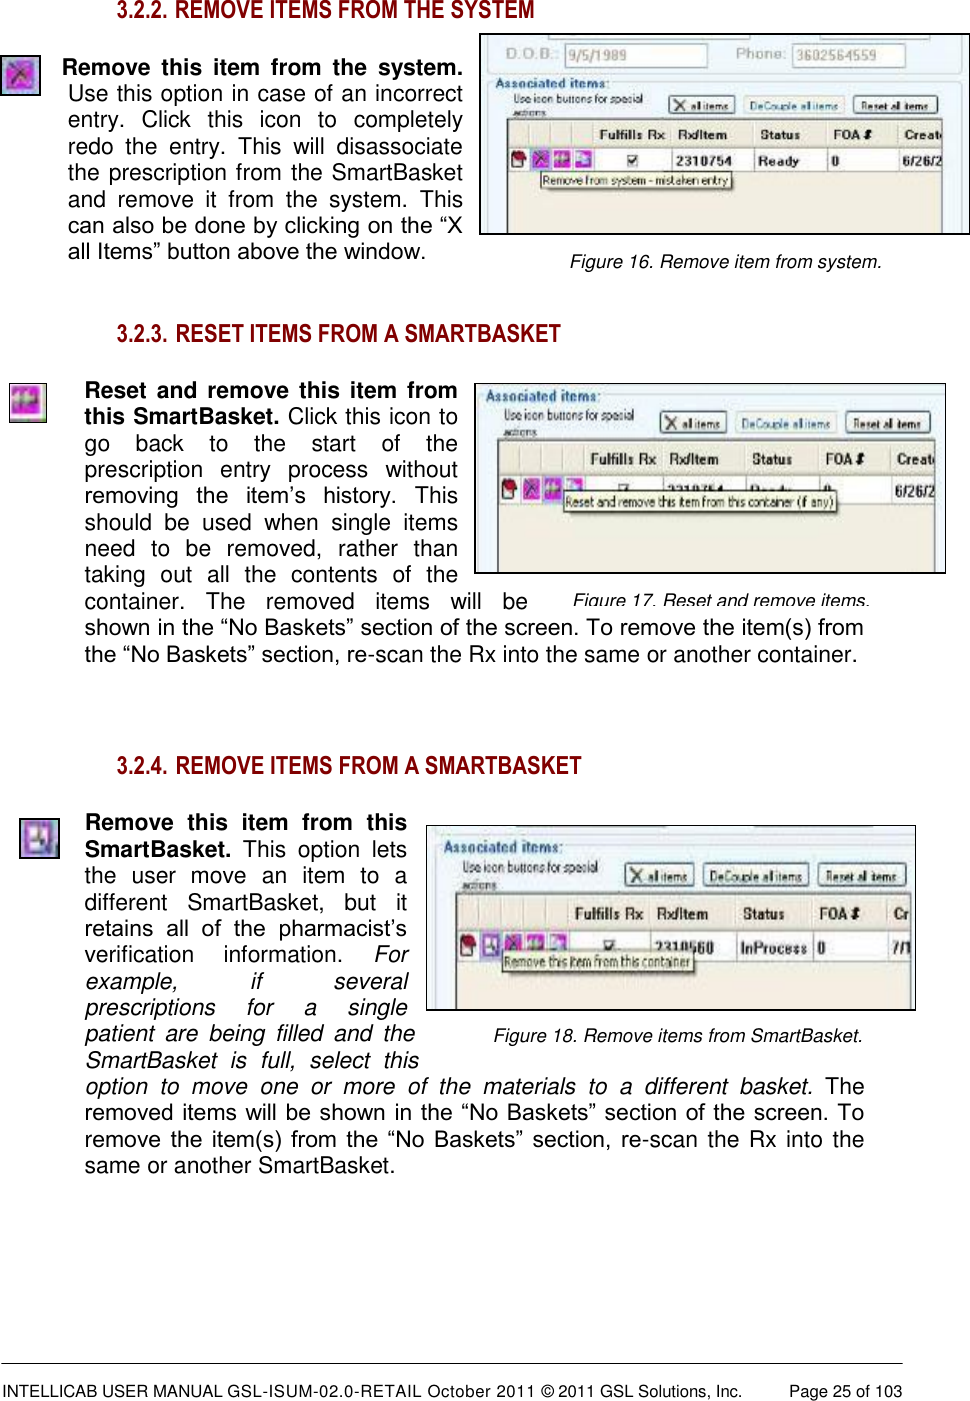  INTELLICAB USER MANUAL GSL-ISUM-02.0-RETAIL October 2011 © 2011 GSL Solutions, Inc.   Page 25 of 103   Figure 16. Remove item from system.  Figure 18. Remove items from SmartBasket.  Figure 17. Reset and remove items. 3.2.2.  REMOVE ITEMS FROM THE SYSTEM Remove  this  item  from  the  system. Use this option in case of an incorrect entry.  Click  this  icon  to  completely redo  the  entry.  This  will  disassociate the prescription from the SmartBasket and  remove  it  from  the  system.  This can also be done by clicking on the “X all Items” button above the window.   3.2.3.  RESET ITEMS FROM A SMARTBASKET Reset and  remove this item from this SmartBasket. Click this icon to go  back  to  the  start  of  the prescription  entry  process  without removing  the  item’s  history.  This should  be  used  when  single  items need  to  be  removed,  rather  than taking  out  all  the  contents  of  the container.  The  removed  items  will  be shown in the “No Baskets” section of the screen. To remove the item(s) from the “No Baskets” section, re-scan the Rx into the same or another container.  3.2.4.  REMOVE ITEMS FROM A SMARTBASKET Remove  this  item  from  this SmartBasket.  This  option  lets the  user  move  an  item  to  a different  SmartBasket,  but  it retains  all  of  the  pharmacist’s verification  information.  For example,  if  several prescriptions  for  a  single patient  are  being  filled  and  the SmartBasket  is  full,  select  this option  to  move  one  or  more  of  the  materials  to  a  different  basket.  The removed items will be shown in the “No Baskets” section of the screen. To remove  the  item(s)  from  the  “No  Baskets”  section,  re-scan the Rx into the same or another SmartBasket.    